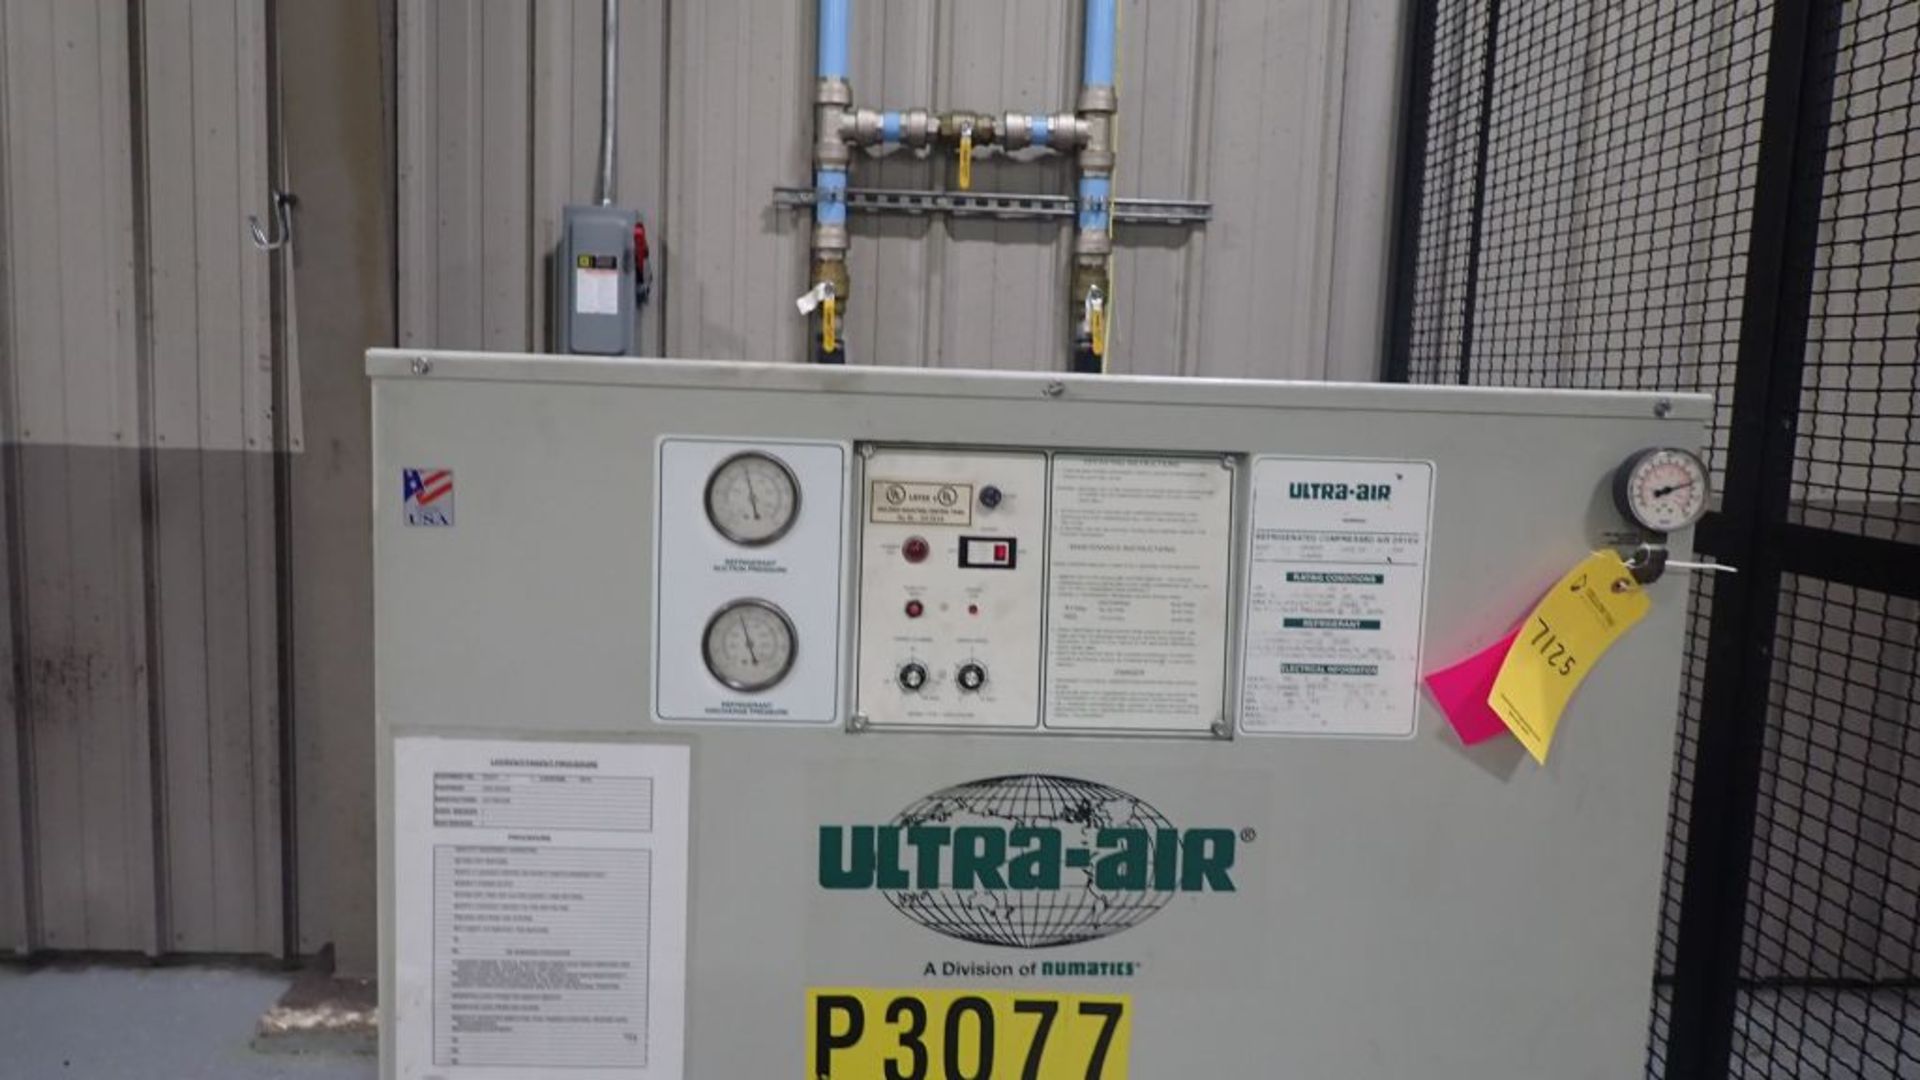 Ultra-Air Refrigerated Compressed Air Dryer | Model No. VA 500-D; Tag: 227125 - Image 5 of 5